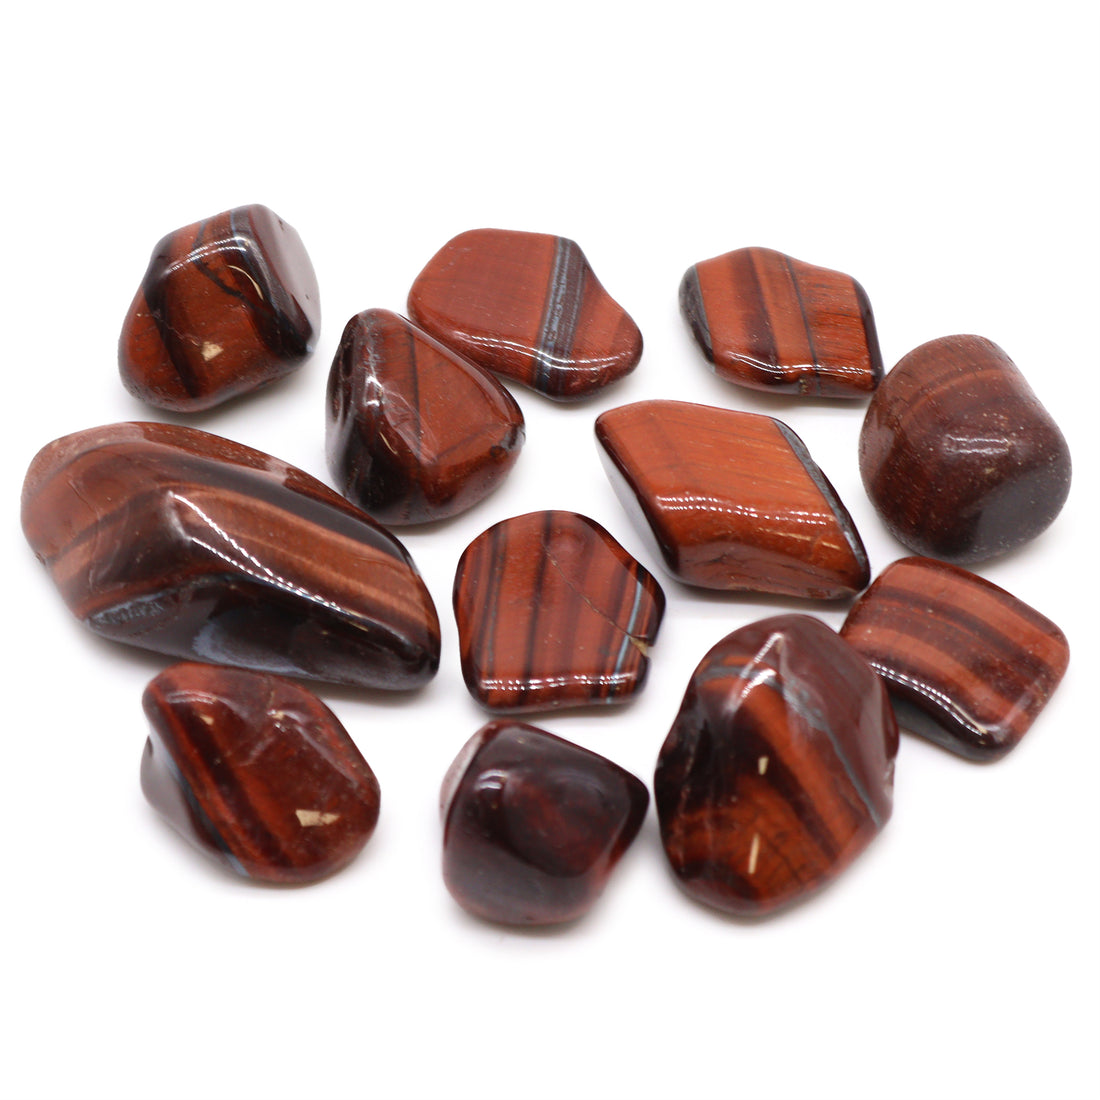 Bag of 12 African Gemstone Tigers Eye - Red - Size 7 - 26mm (KG)